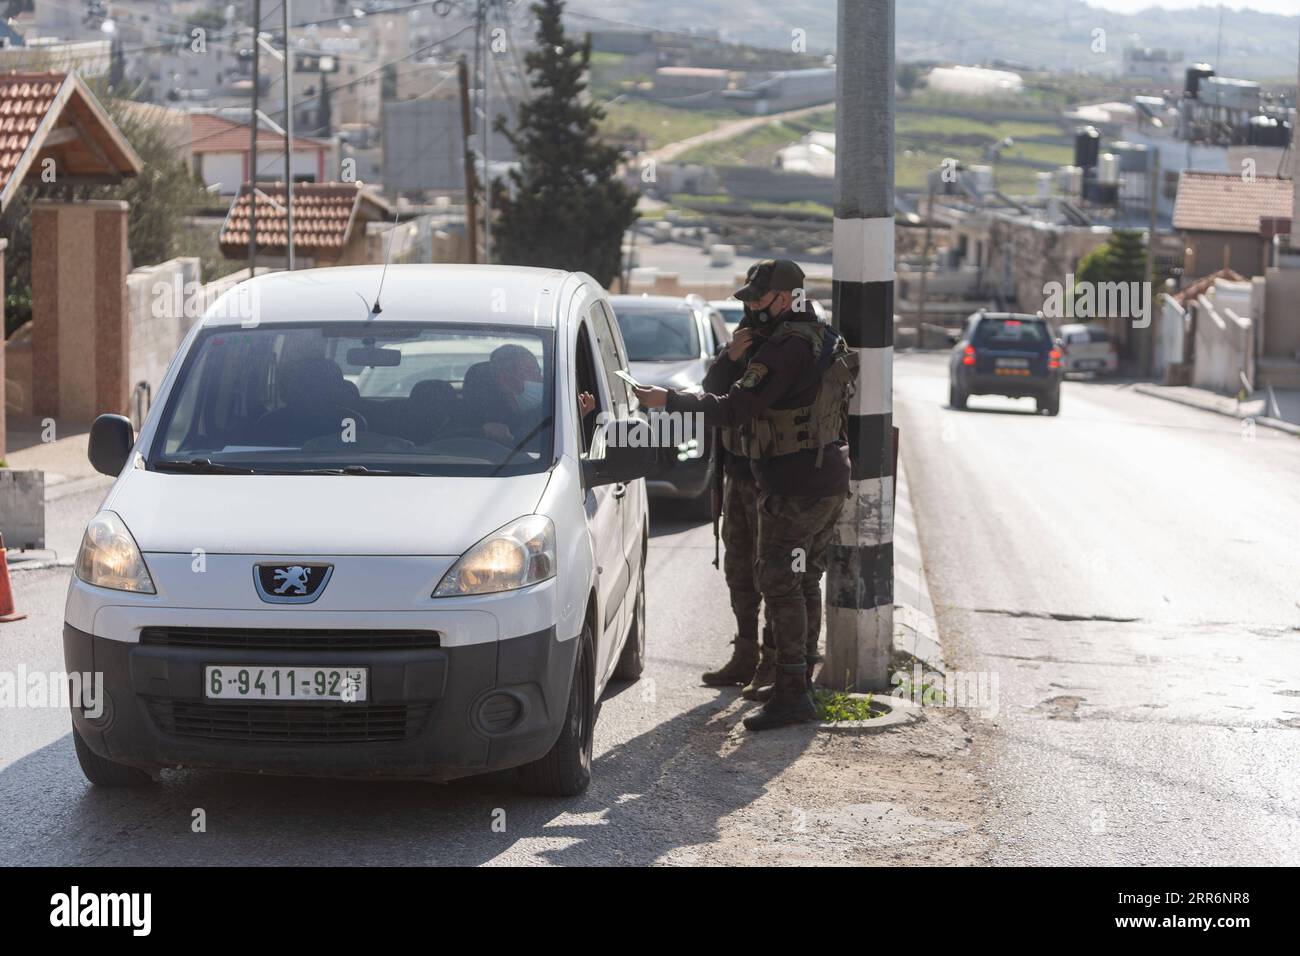 210224 -- BETHLEHEM, Feb. 24, 2021 -- Palestinian police officers work at a checkpoint at one of the main roads of Beit Sahour near the West Bank city Bethlehem, Feb. 24, 2021. The Governor of Bethlehem announced the closure of Beit Sahour for 48-hours starting from 12:00 am Wednesday, after increase of the numbers of COVID-19 infections. Photo by /Xinhua MIDEAST-BETHLEHEM-COVID-19-CHECKPOINT LuayxSababa PUBLICATIONxNOTxINxCHN Stock Photo